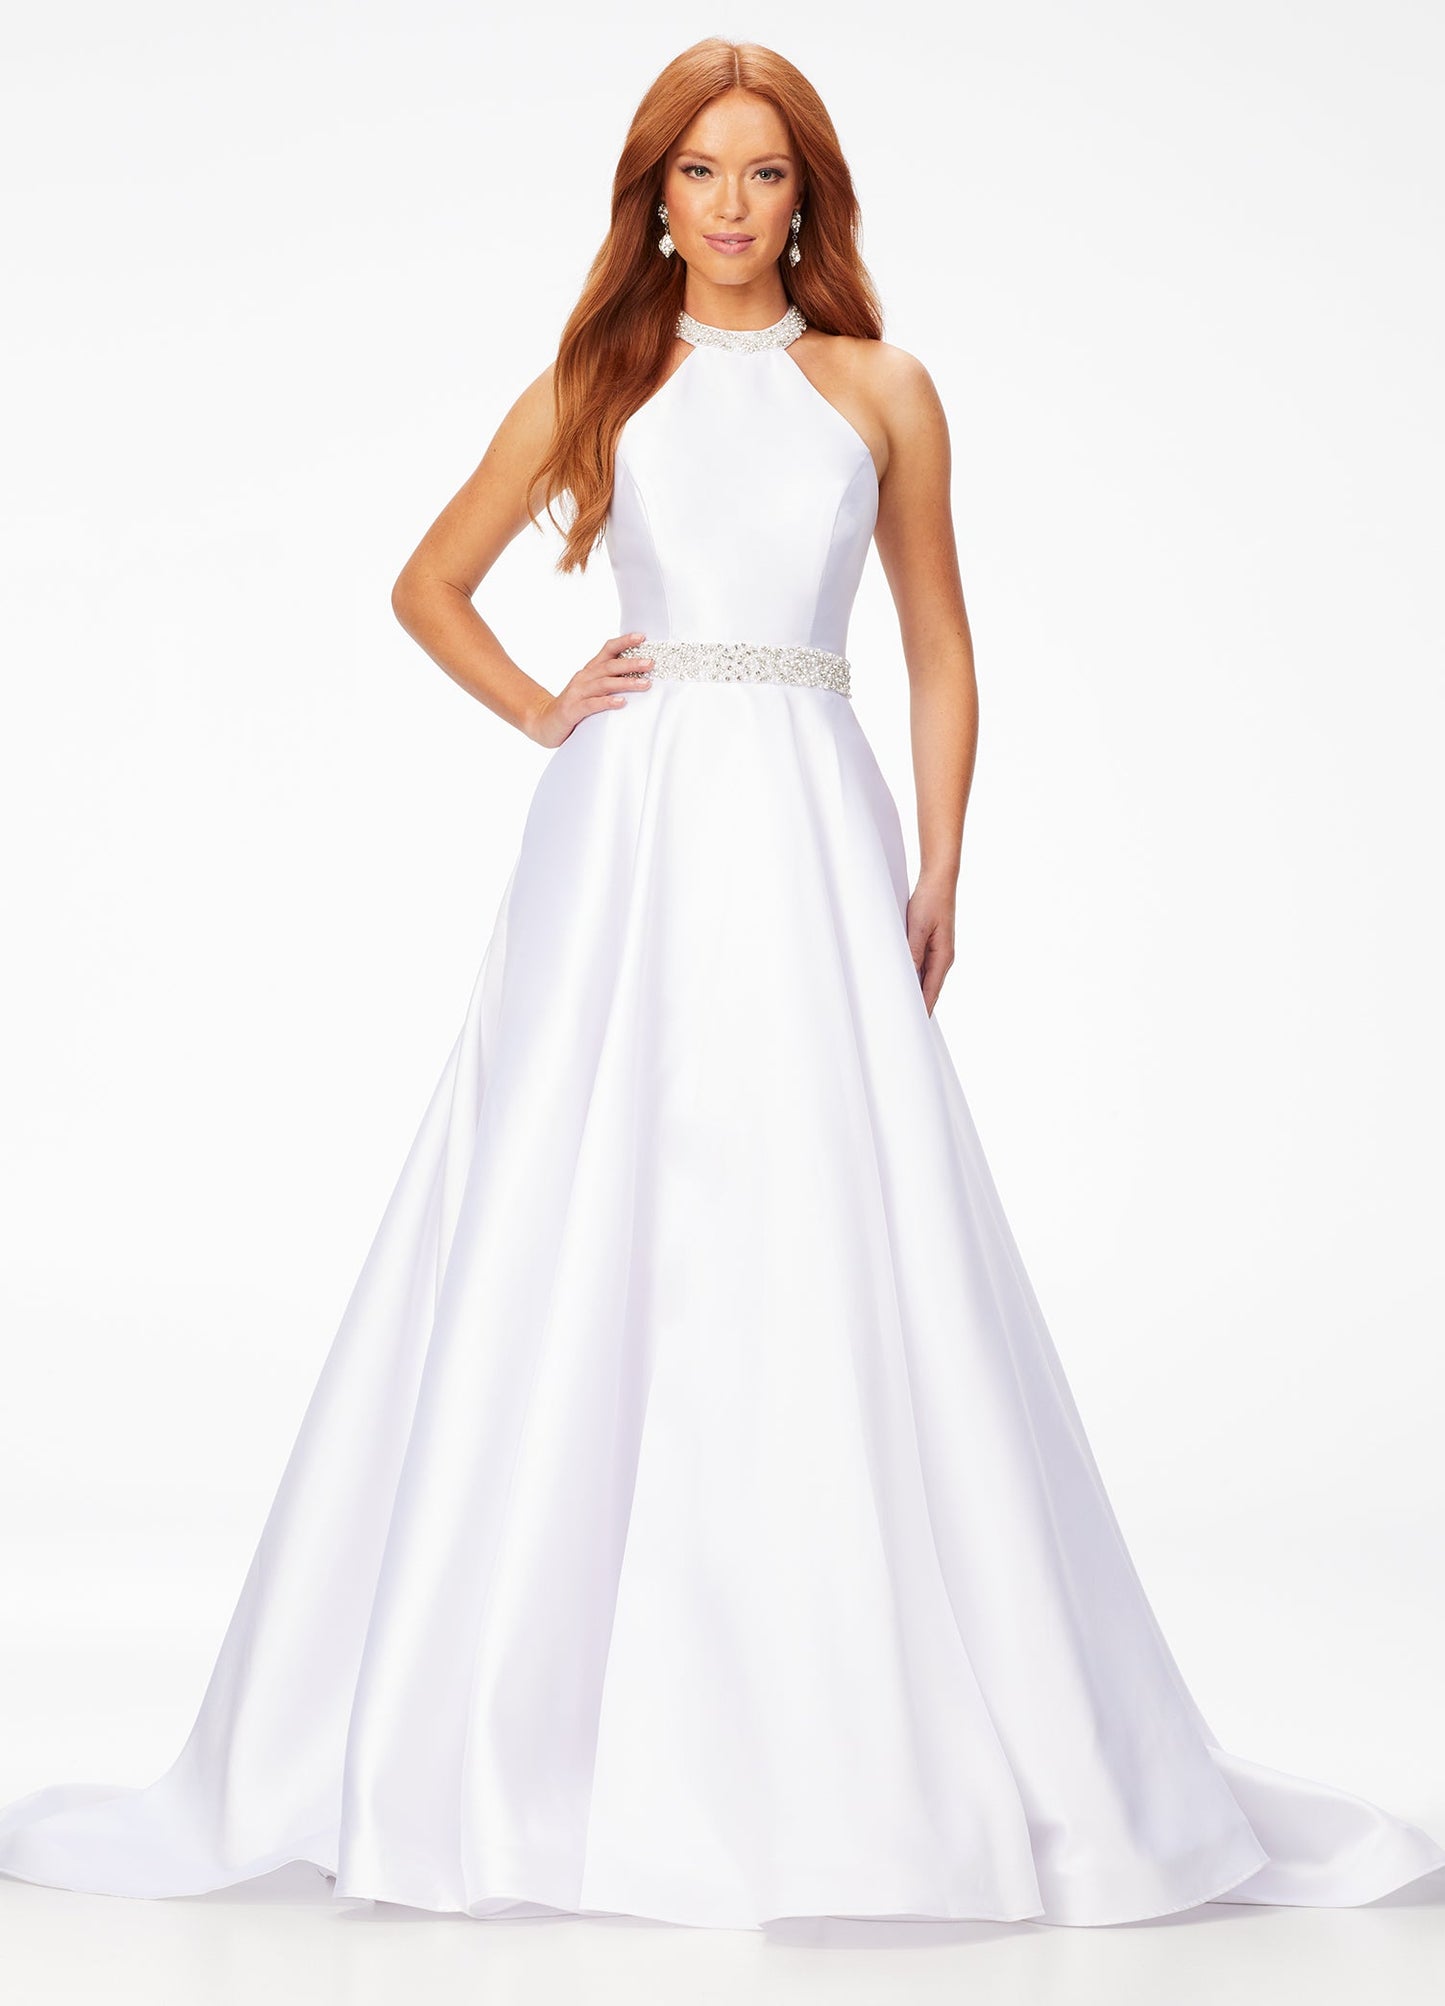 Ashley Lauren 11230 This a line gown features a crystal and pearl encrusted halter neckline and waistline. This gown would be perfect for your next event! Halter Bustier Crystal & Pearl Neckline & Belt Ball Gown Skirt Mikado